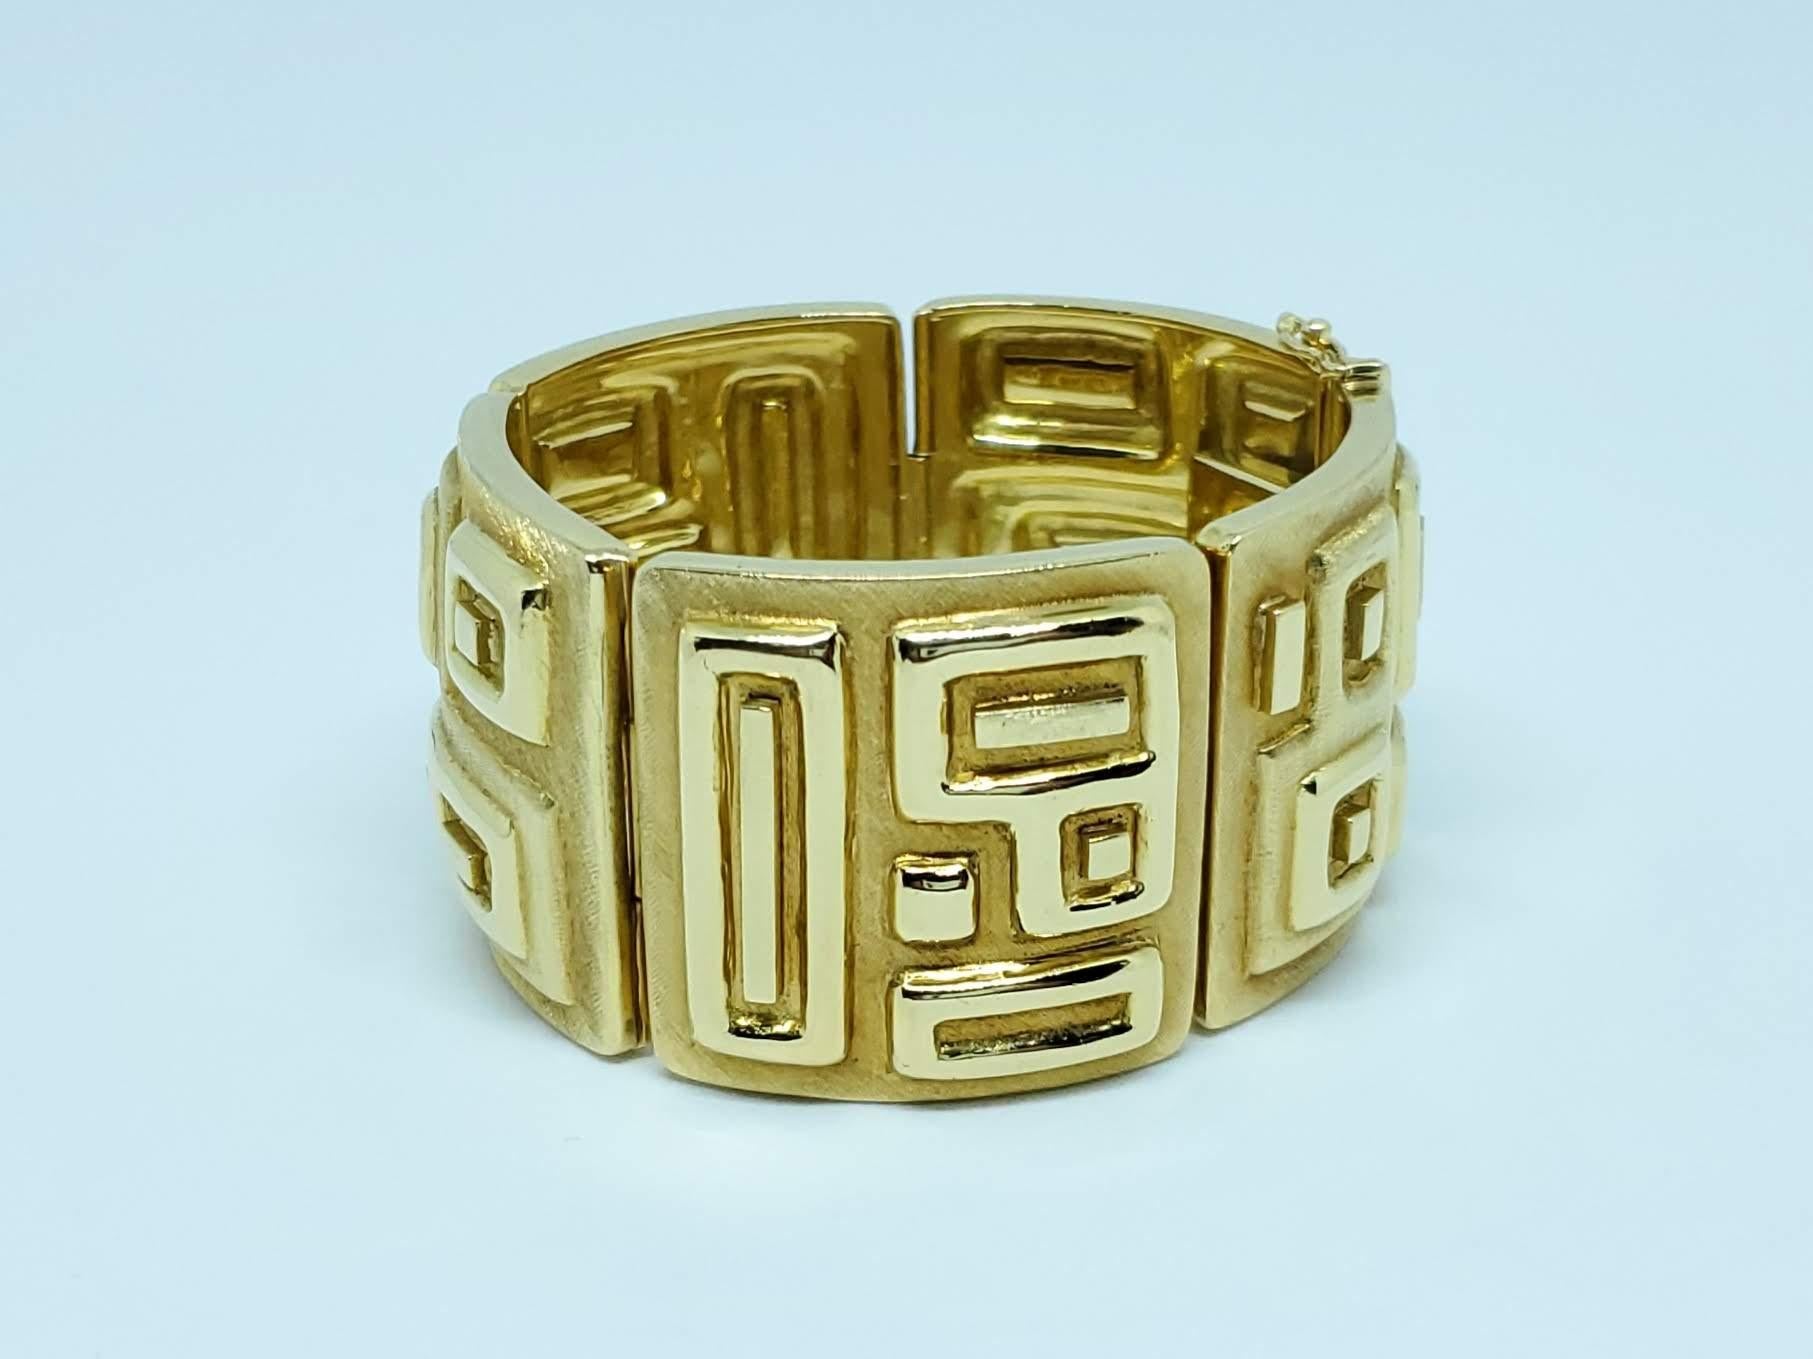 Burle Marx Rare 18 Karat Gold Wide Bracelet In Excellent Condition For Sale In Woodway, TX